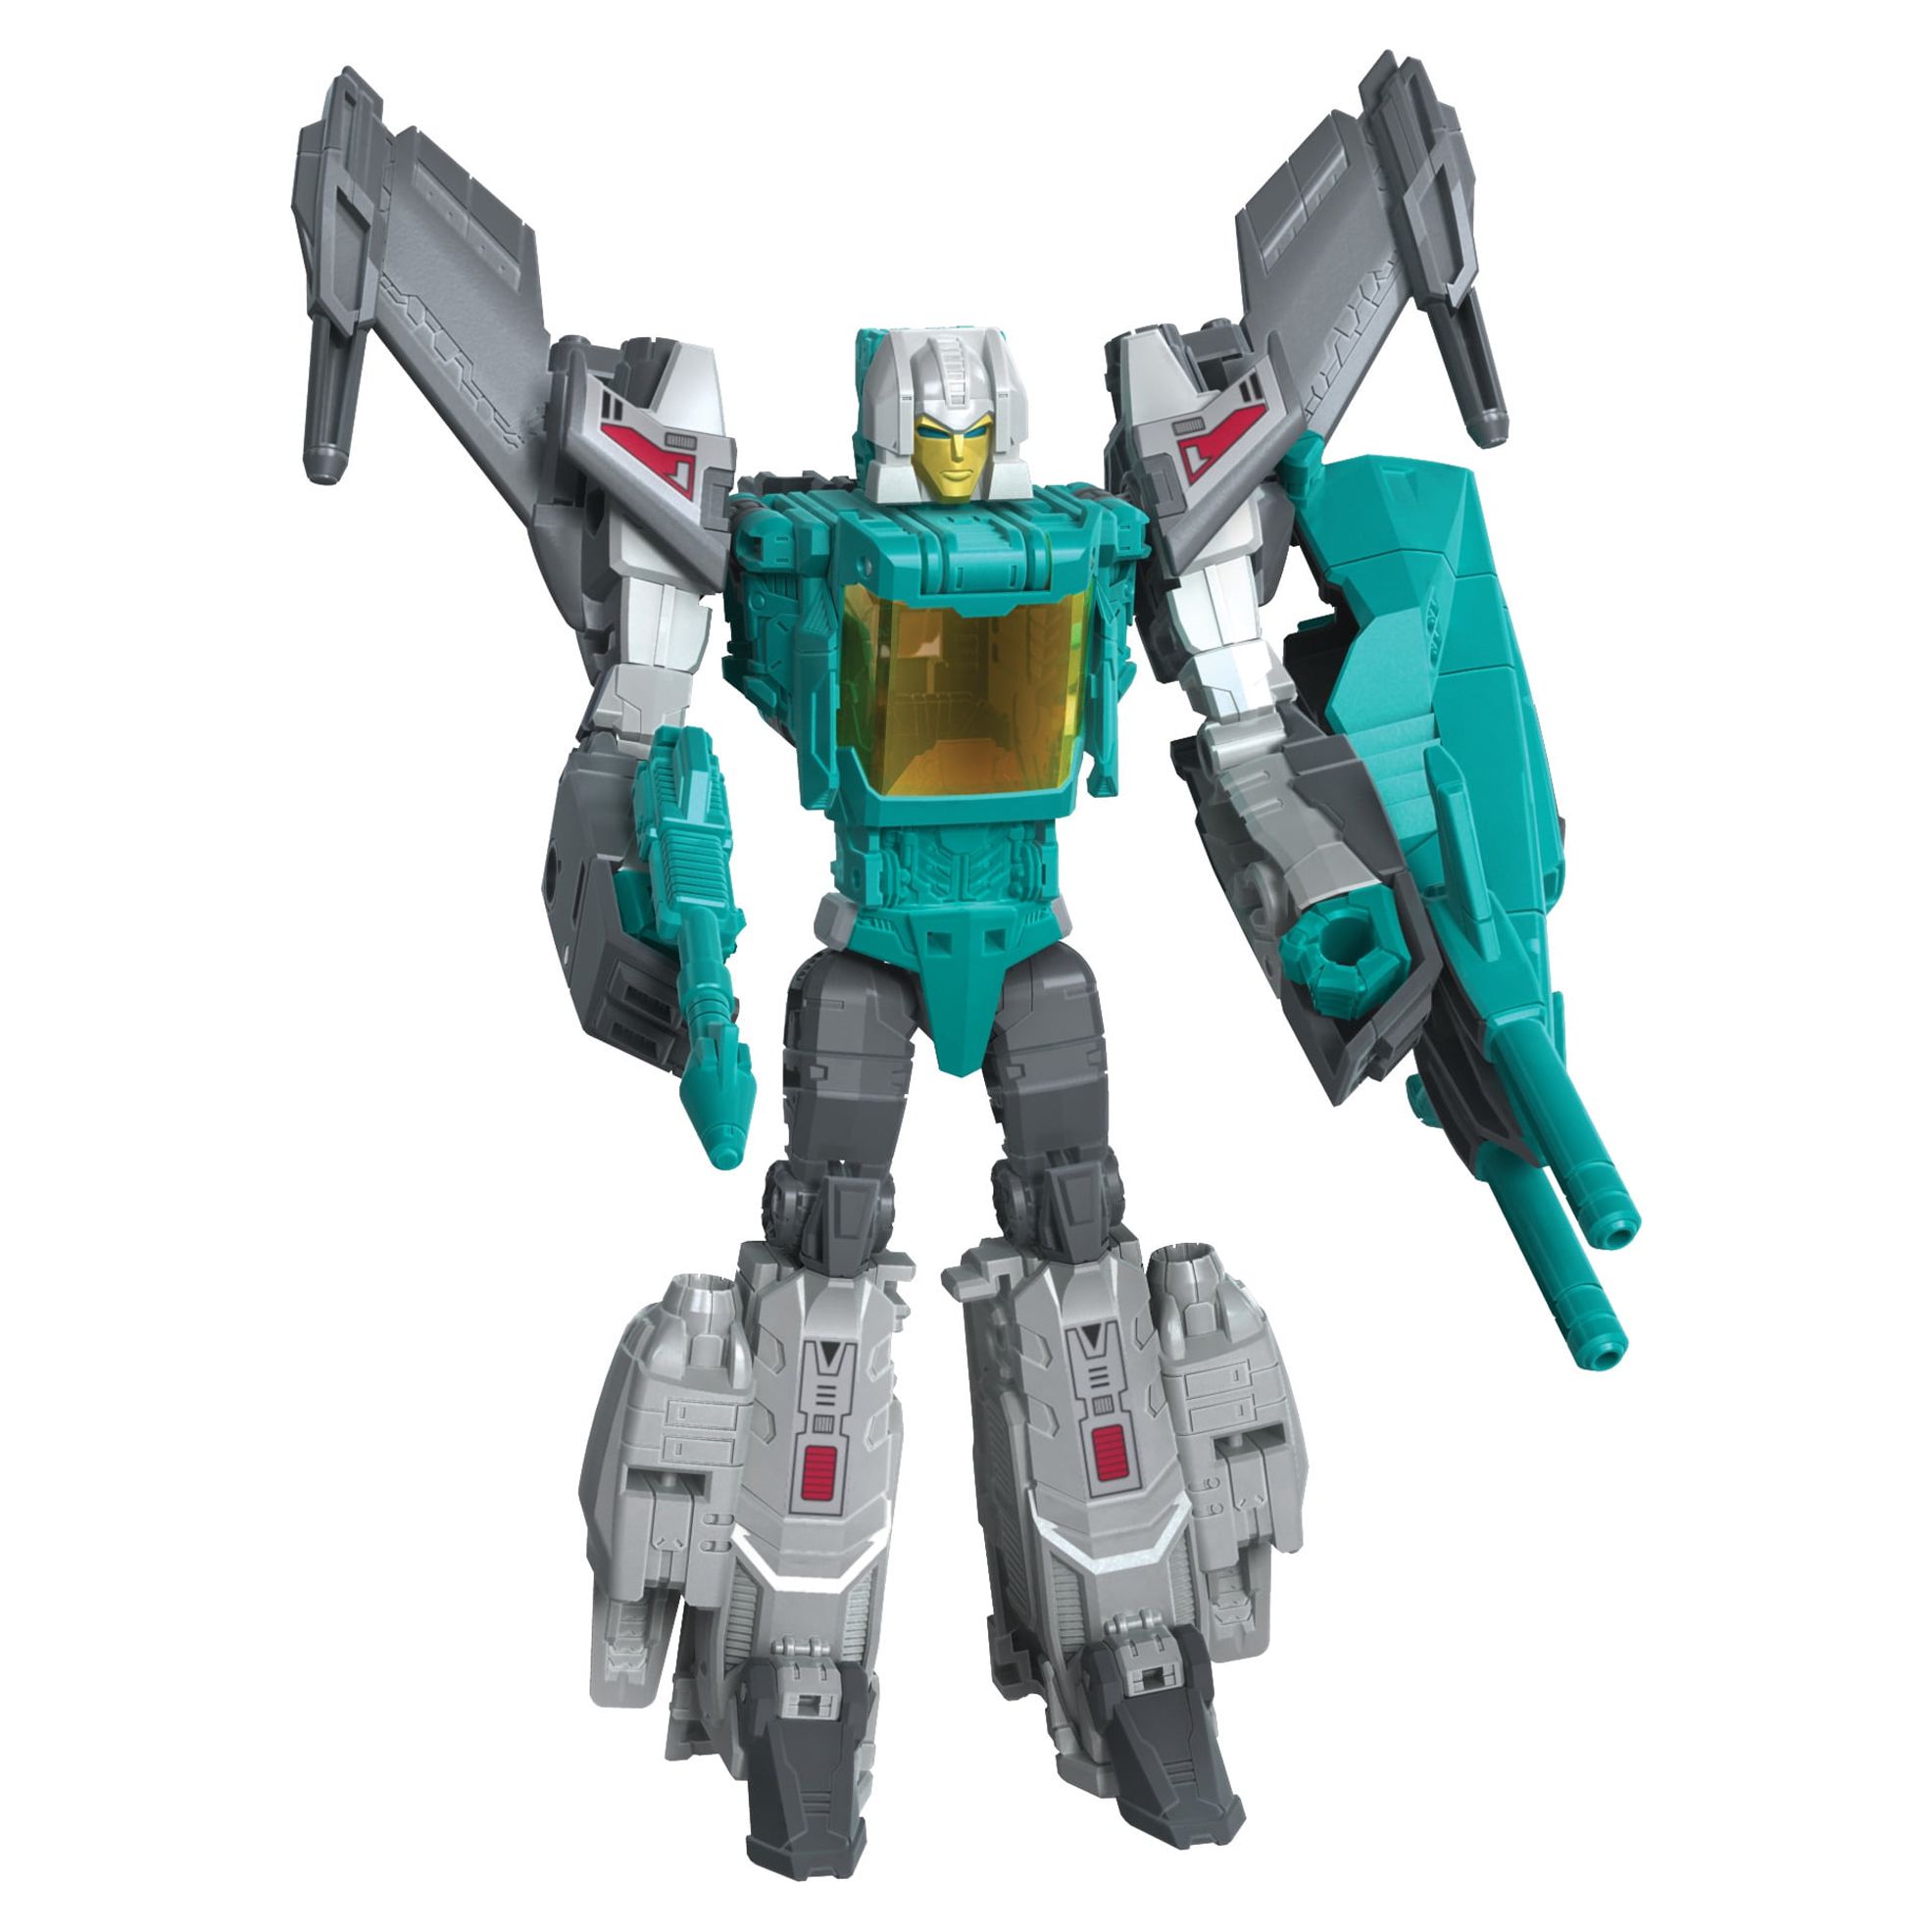 Transformers: Headmaster Autobot Brainstorm Kids Toy Action Figure for Boys and Girls (3”) - image 1 of 9